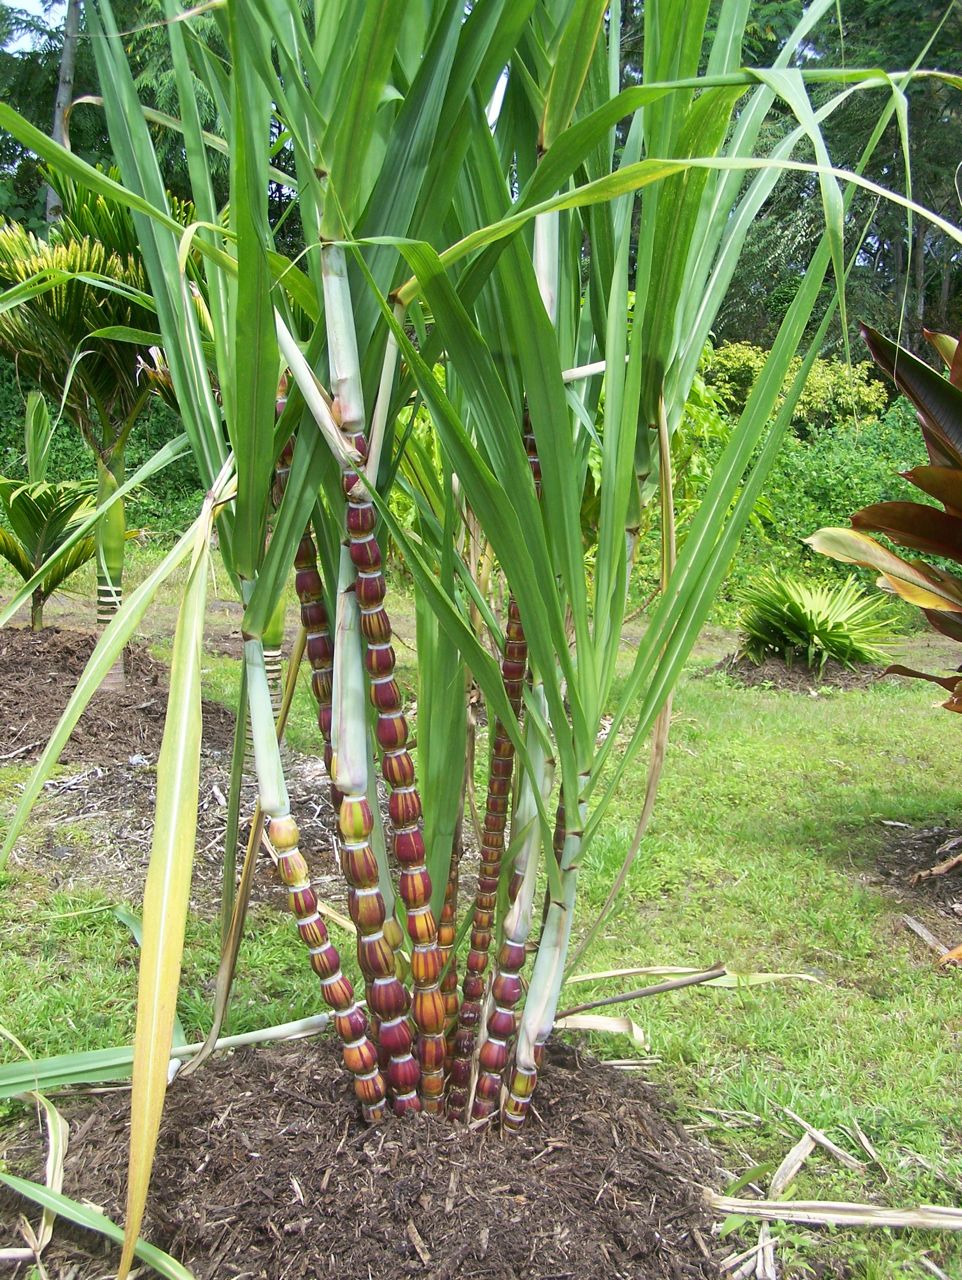 Very Colorful Sugar Cane - Tropical Looking Plants